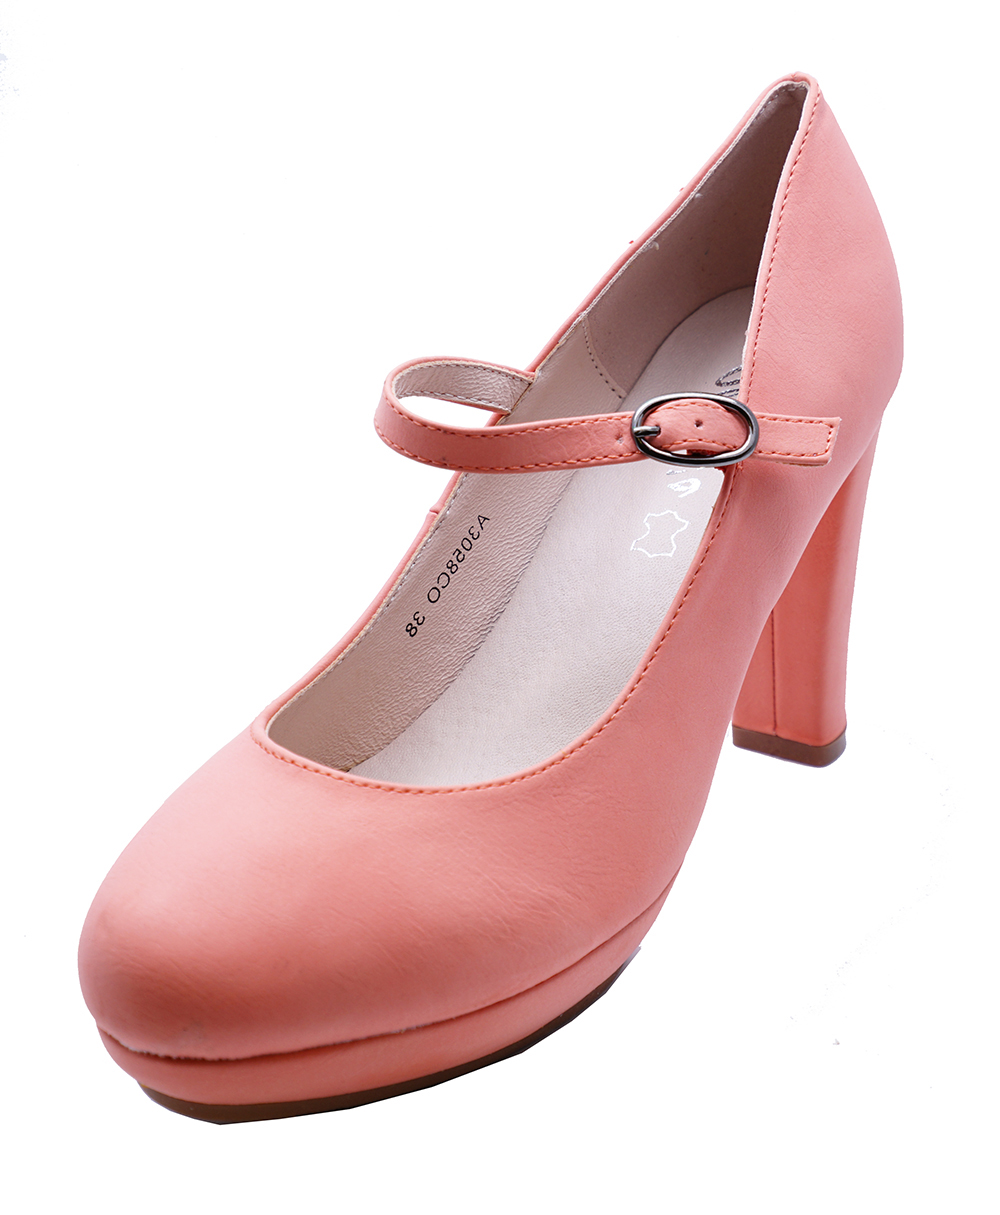 coral court shoes uk